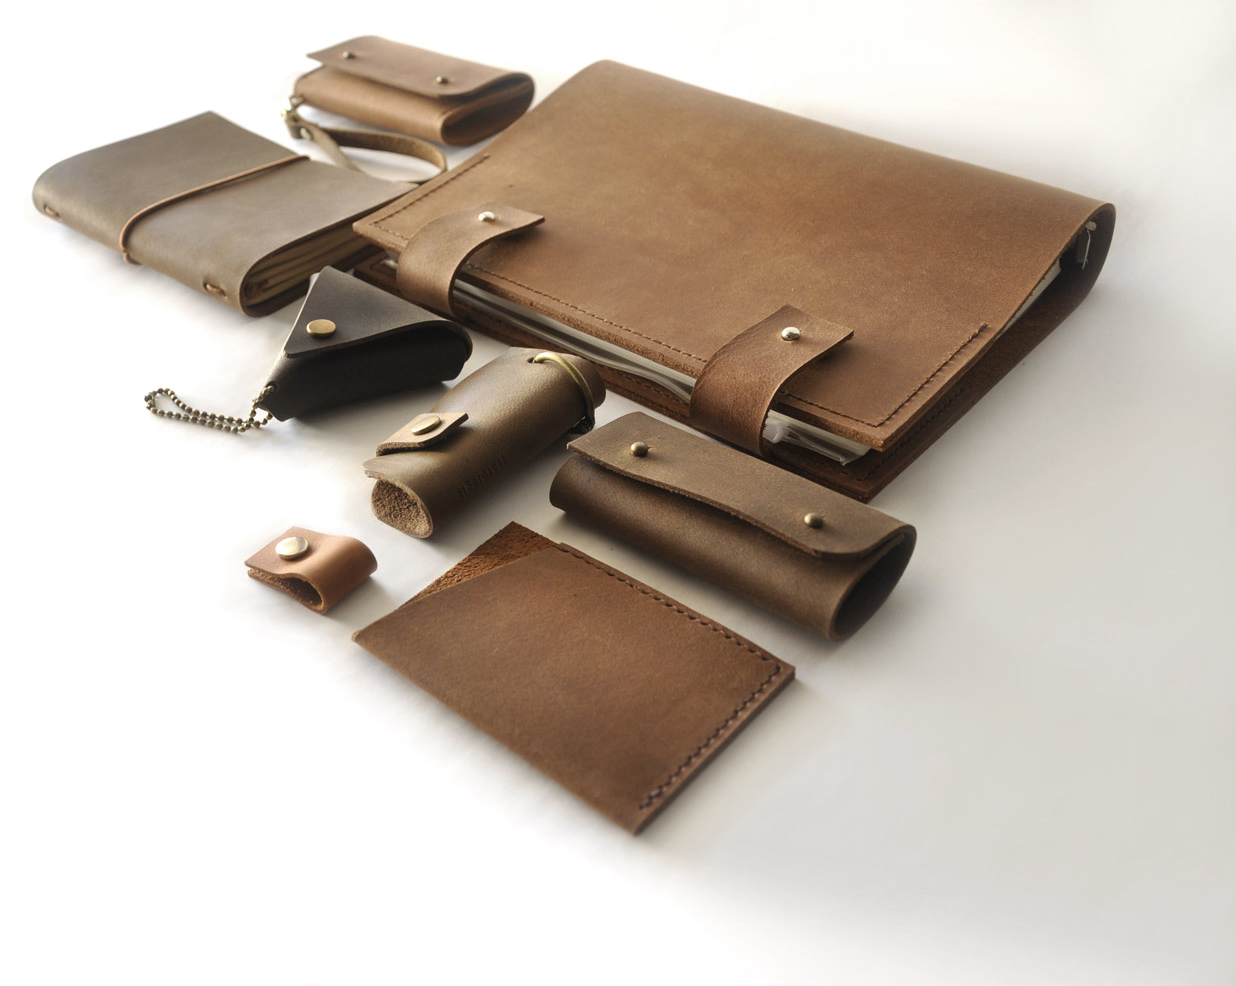 Leather Goods Manufacturing Service USA hetro solutions